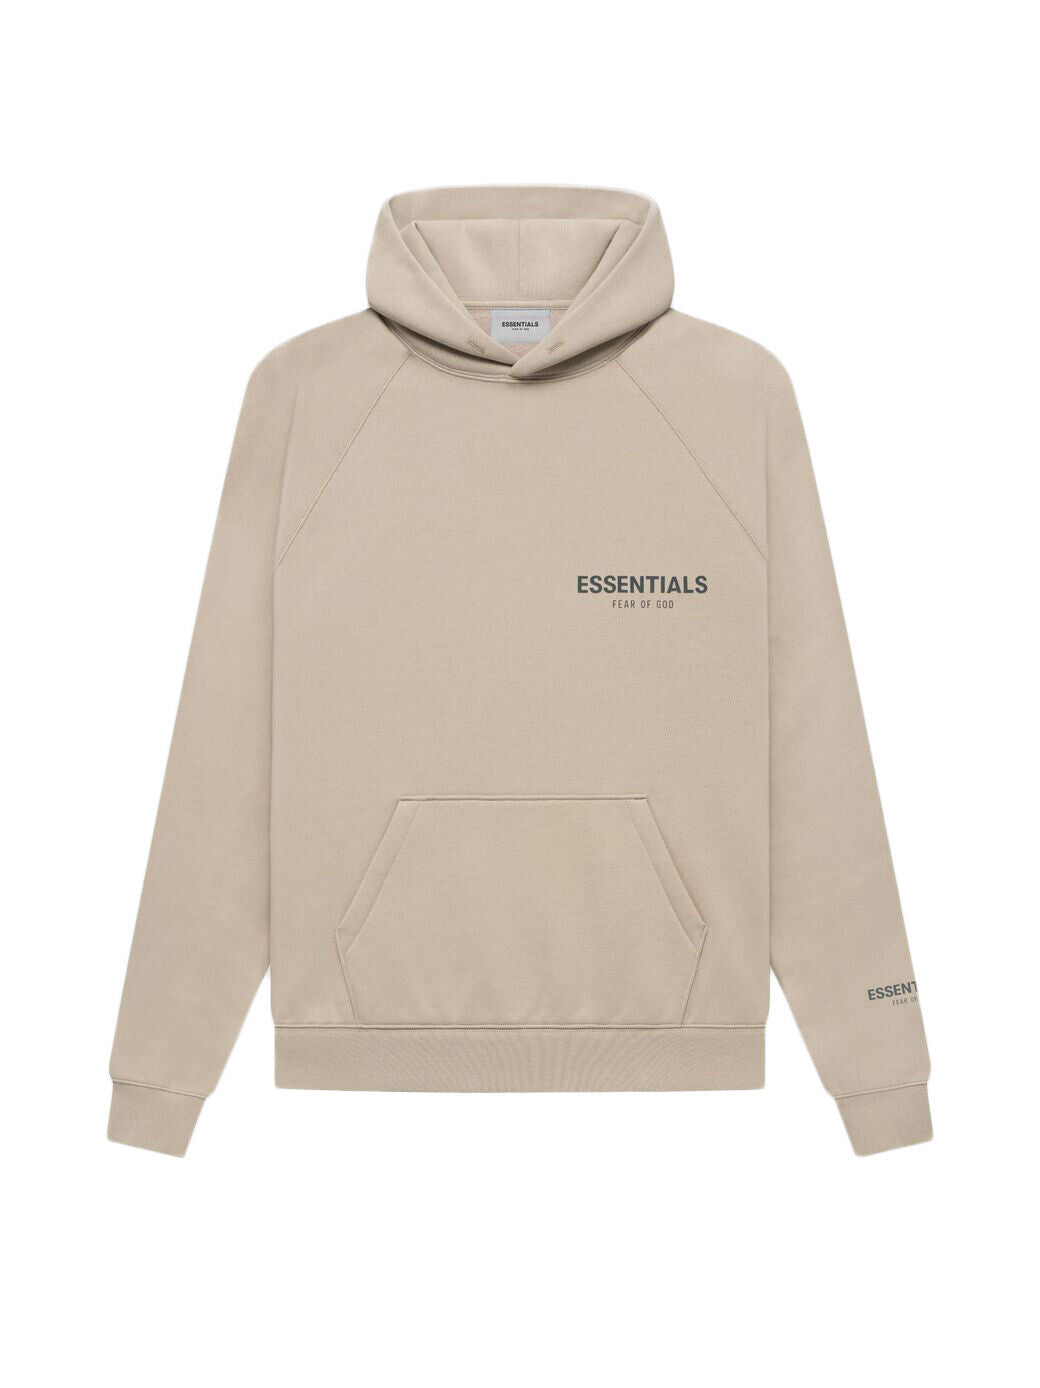 Fear of God Essentials Core Collection Pullover Hoodie Tan Size XS